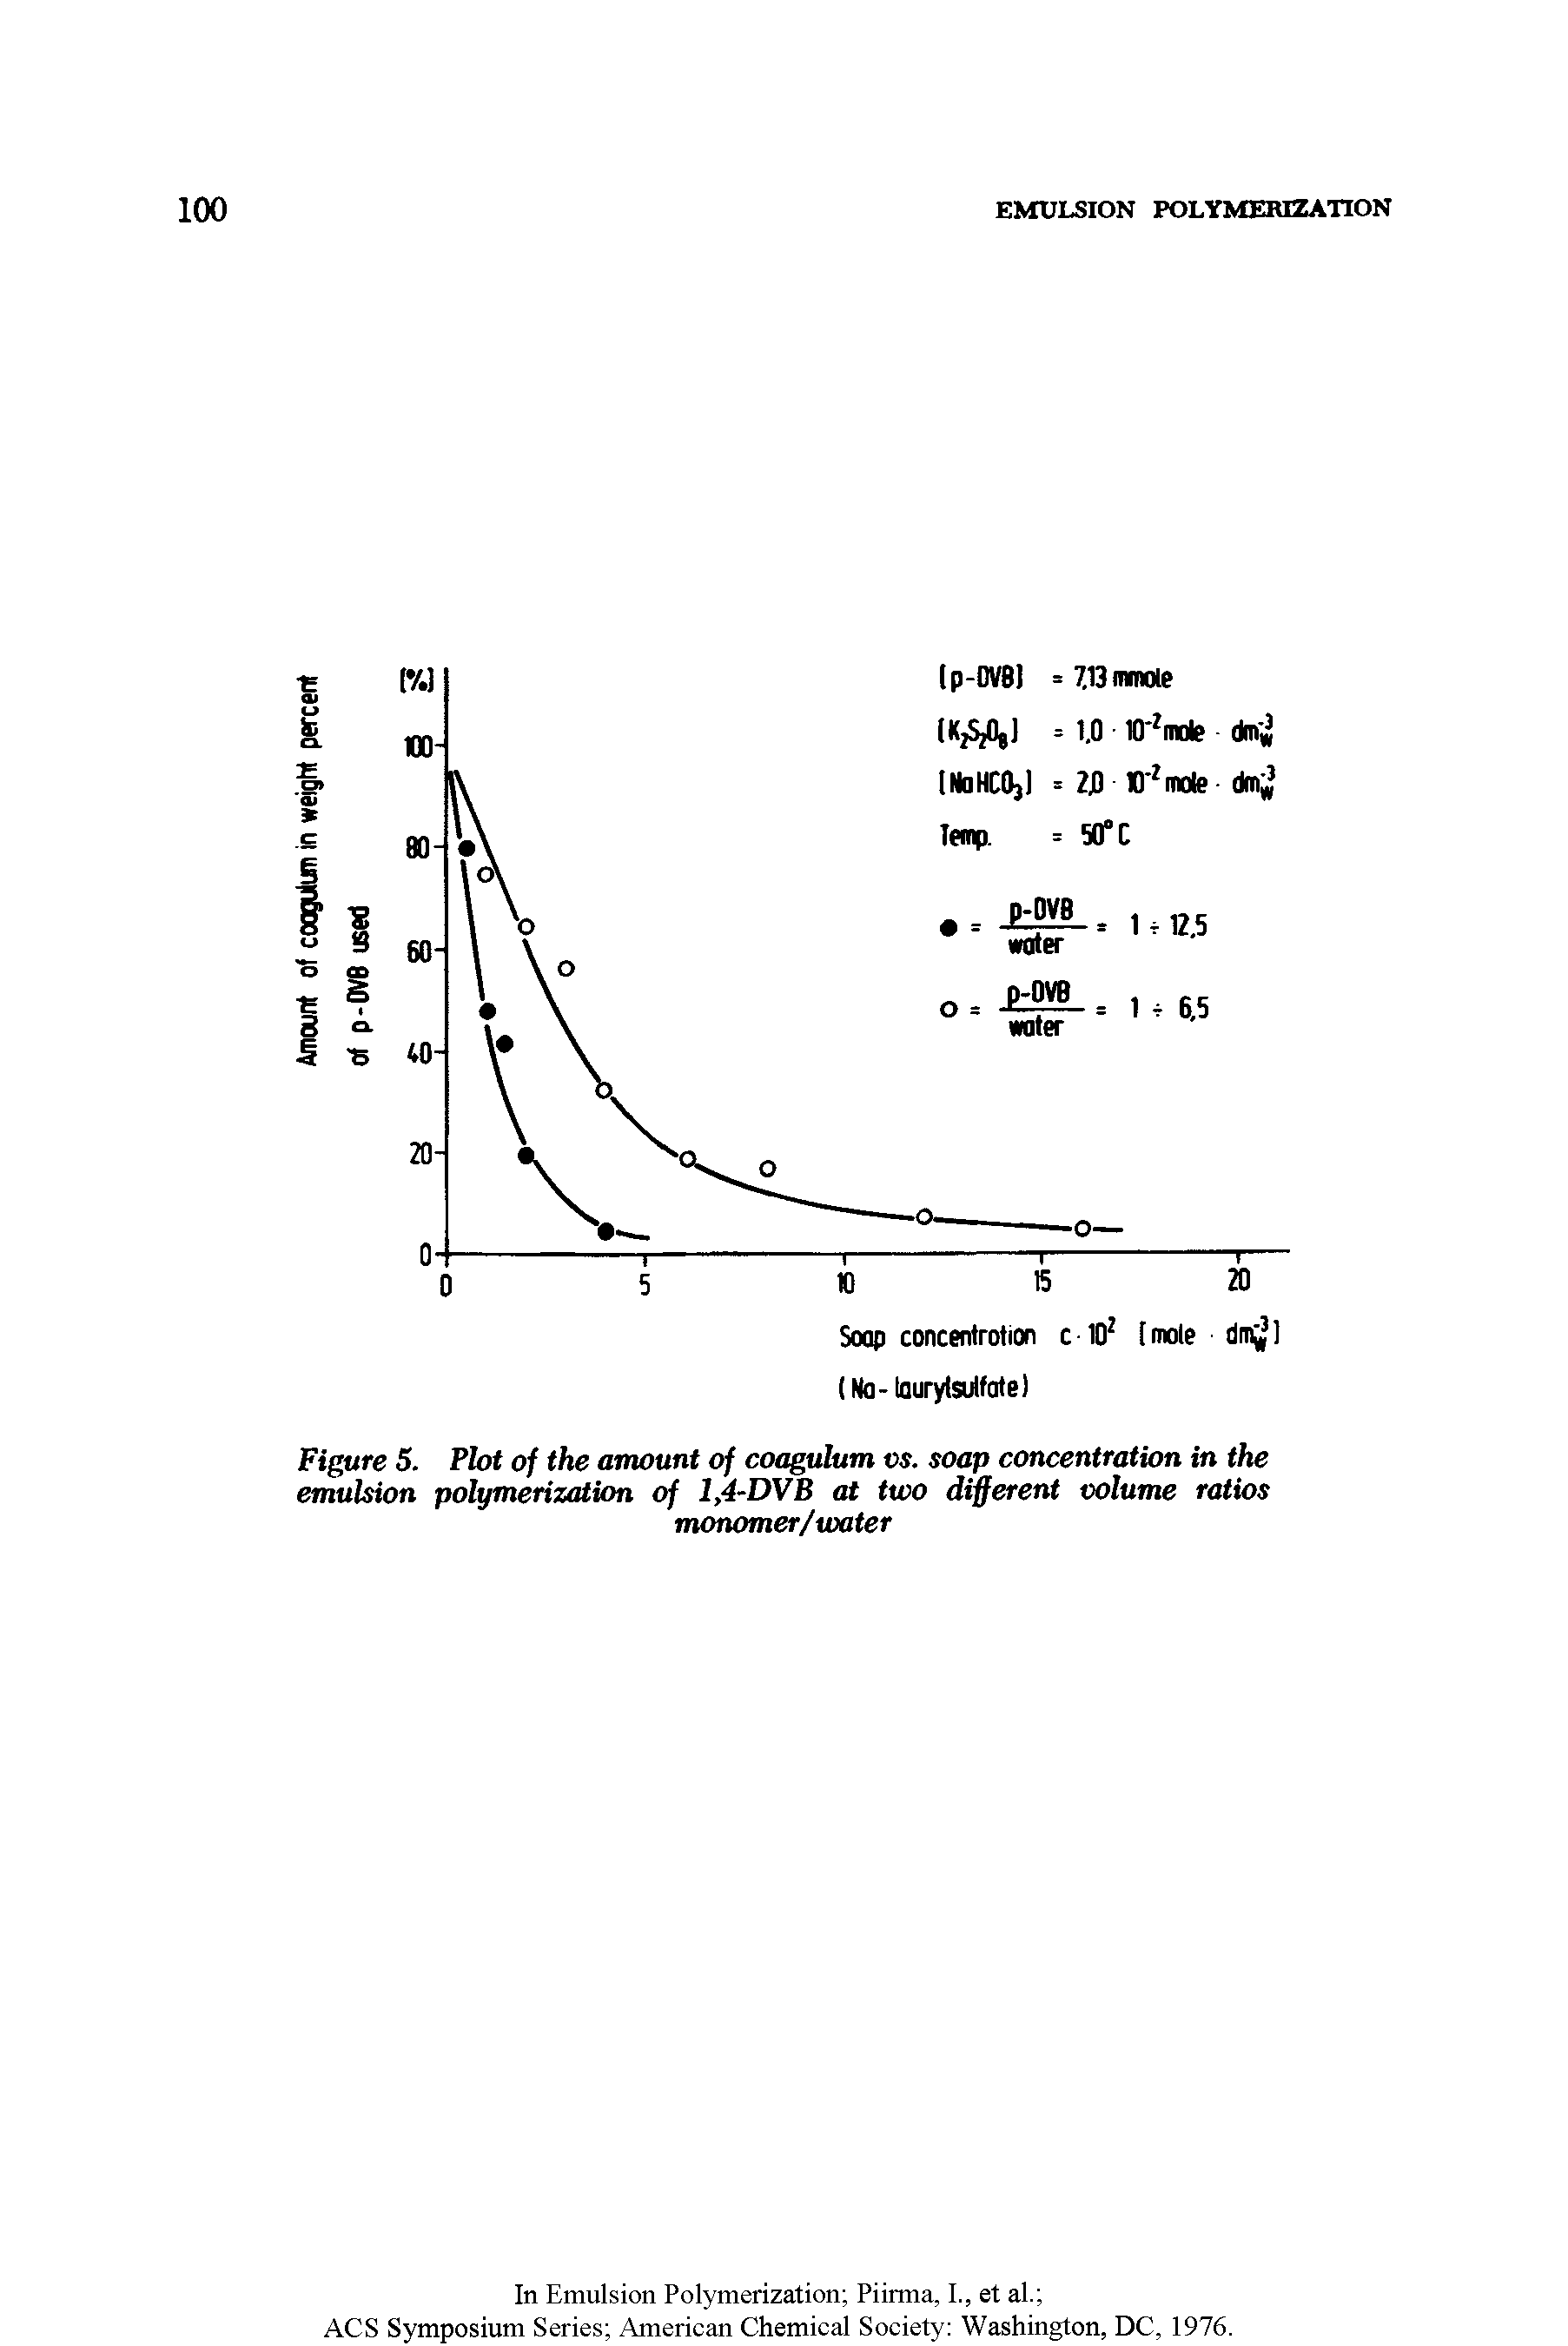 Figure 5. Plot of the amount of coagulum vs. soap concentration in the emulsion polymerization of 1,4-DVB at two different volume ratios monomer/water...